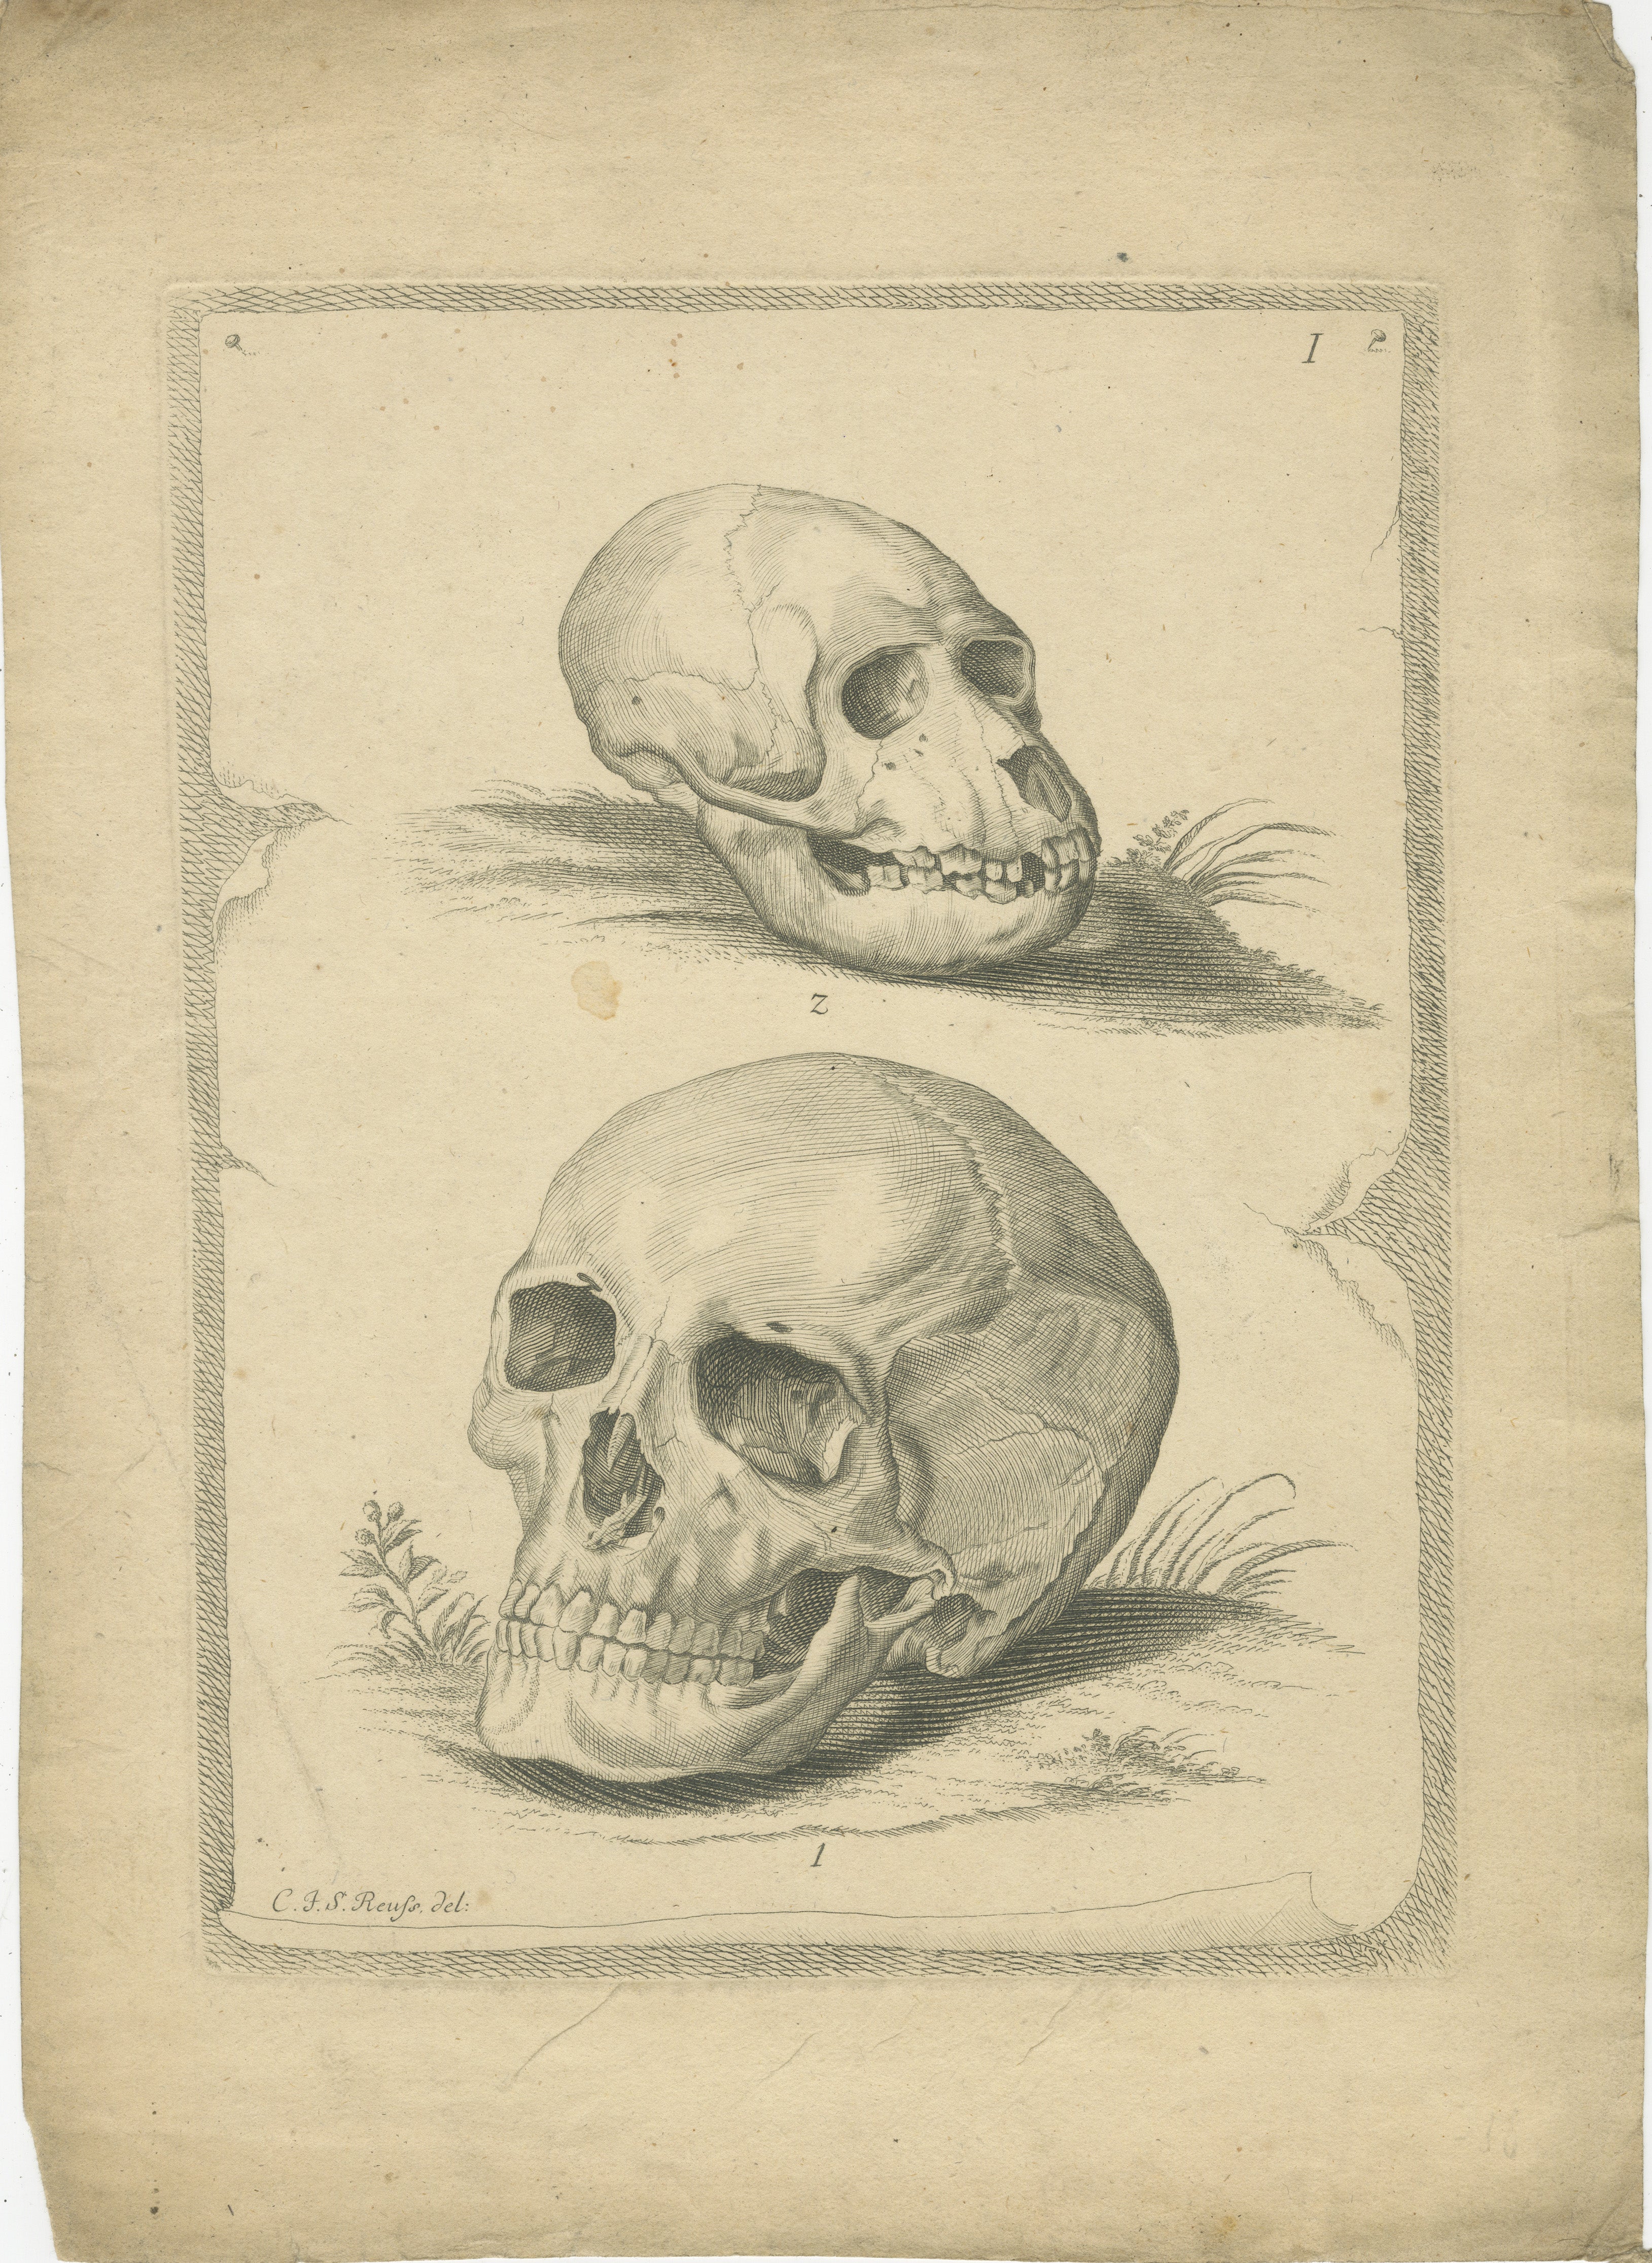 Original antique engraving of a Comparative Anatomy of Primate Skulls

Description: This detailed print by Carl Johann Georg Reuss, an illustrious illustrator, features a striking illustration of two skulls: one human (Homo sapiens) and one primate,